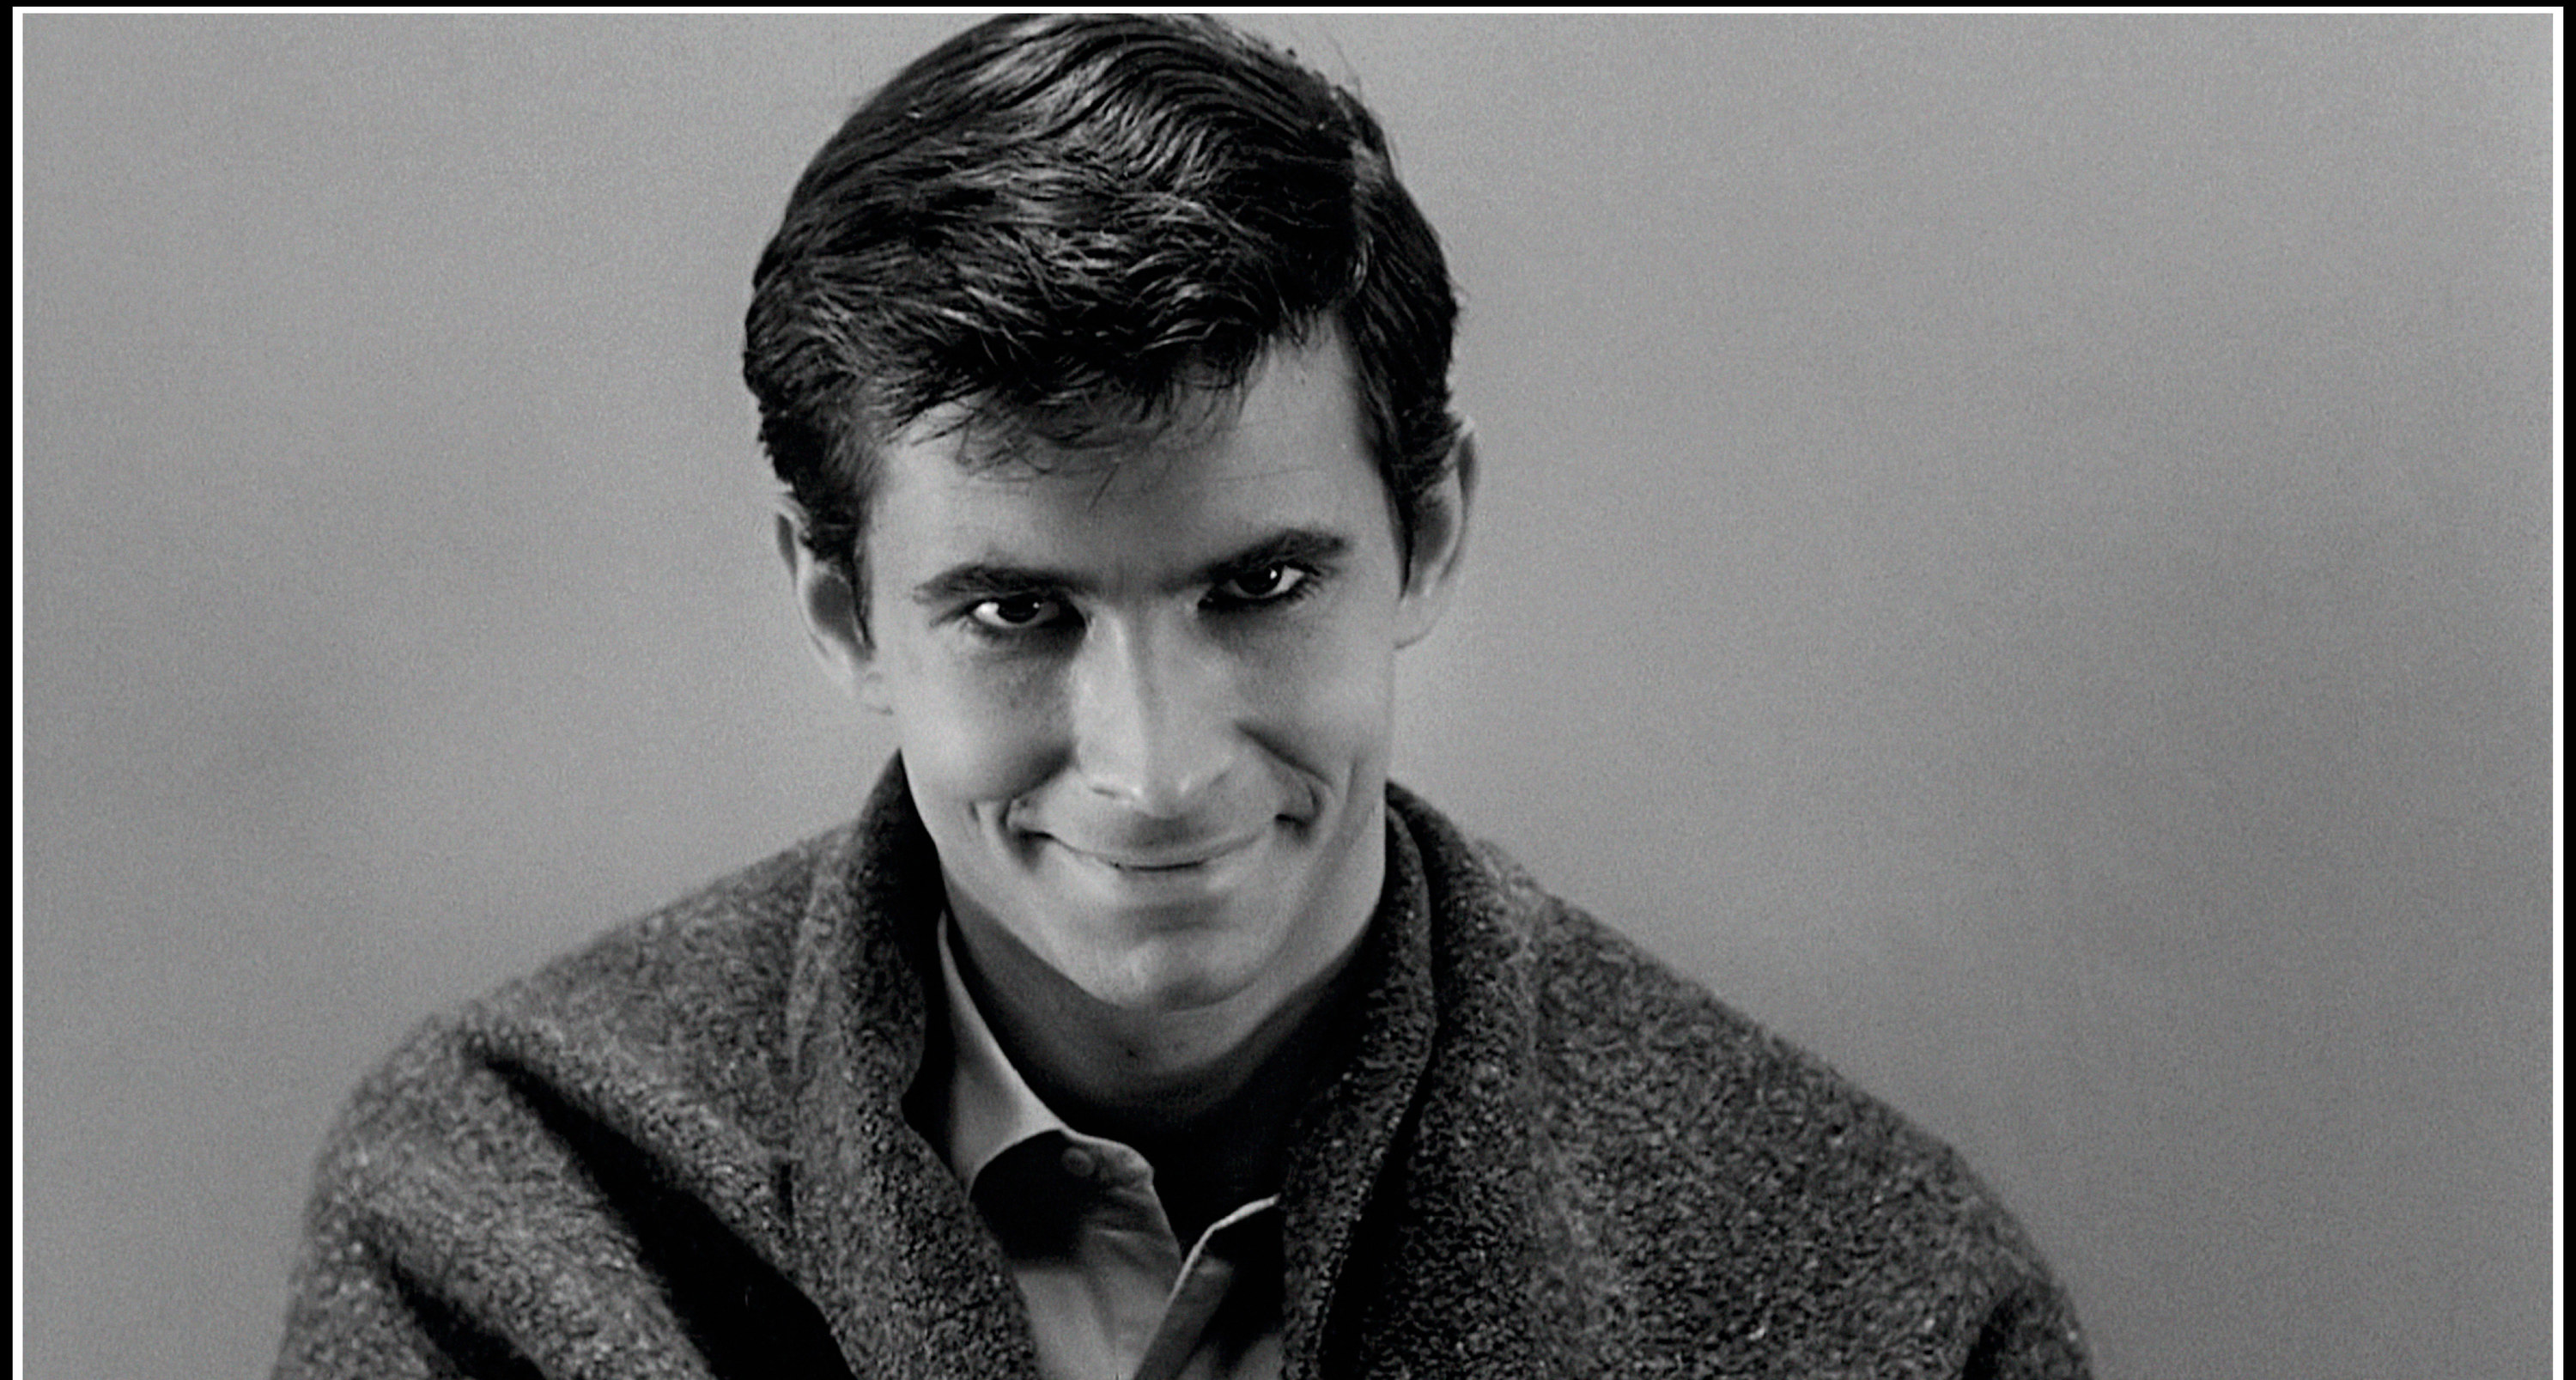 Anthony Perkins showcases a wicked grin while staring directly to camera